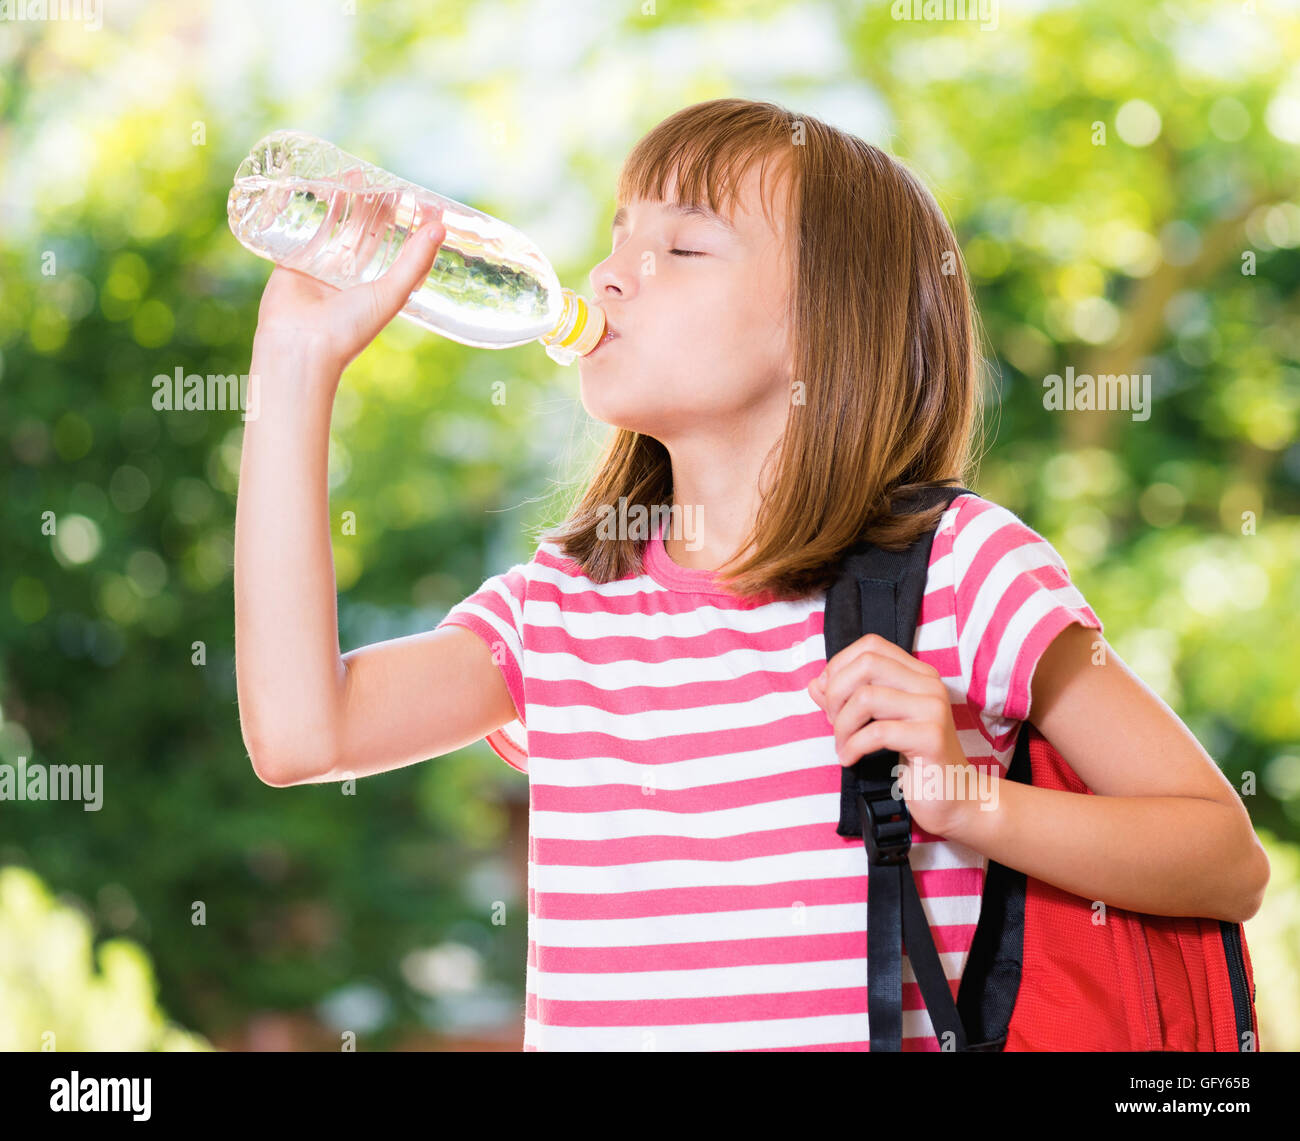 Girl Teen with Drink Water Bottle for Suggest To Drinking Water Stock Image  - Image of cute, clean: 158394385